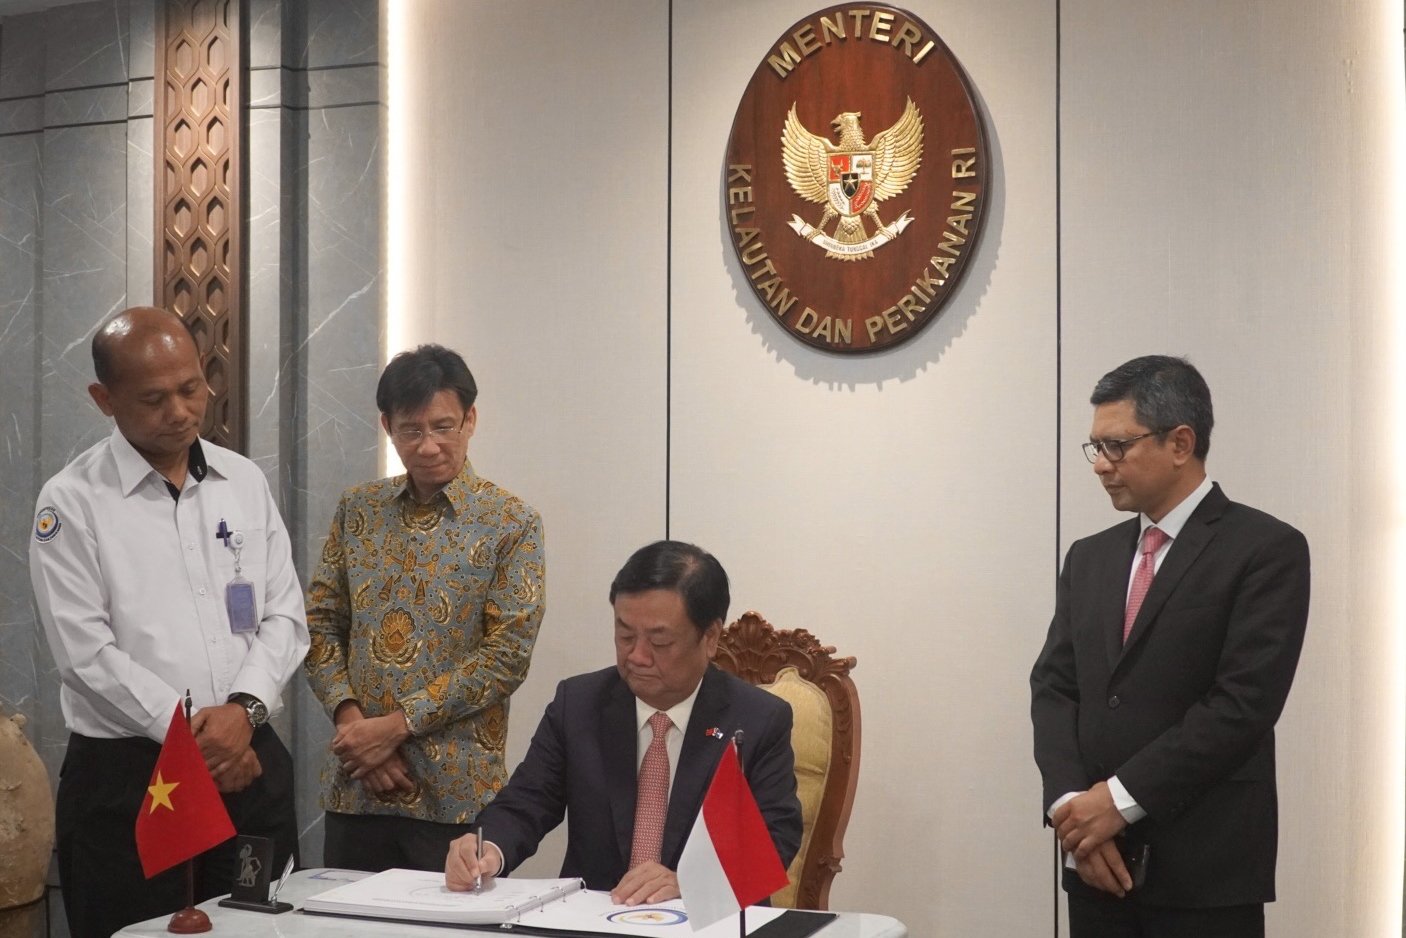 Minister Le Minh Hoan signed a guestbook while visiting the Indonesian Ministry of Marine Affairs and Fisheries.